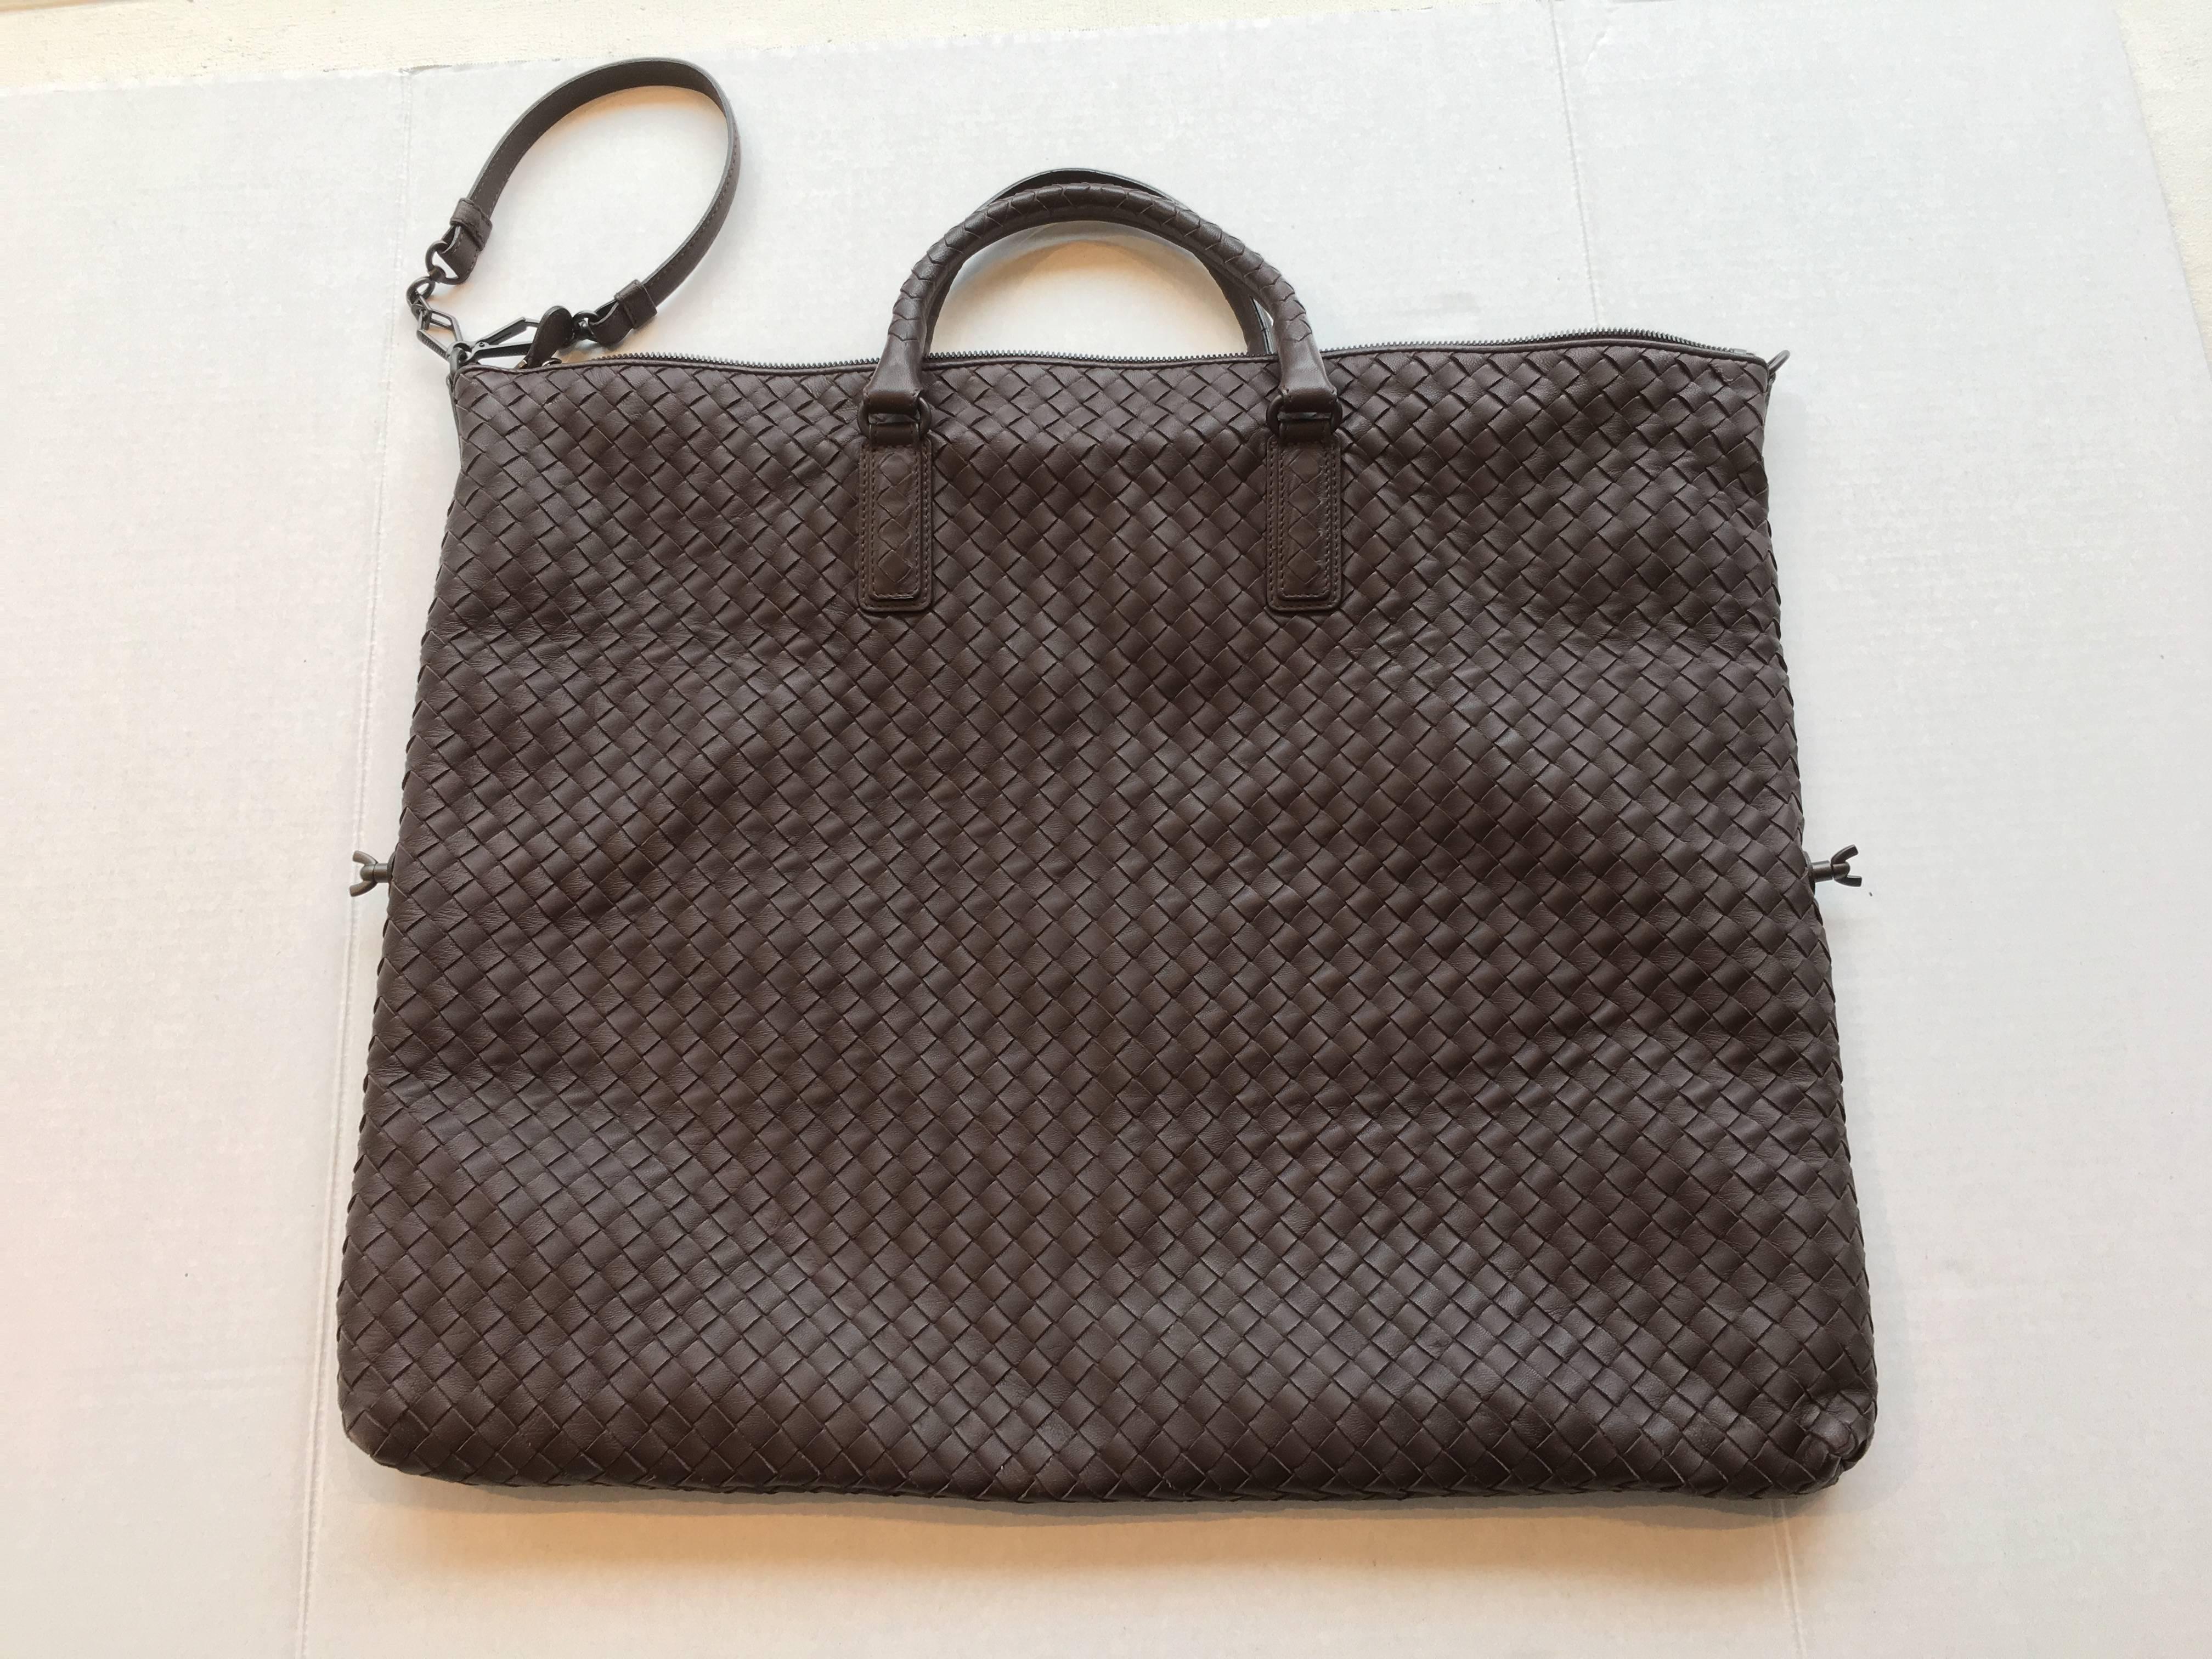 Bottega Veneta Intrecciato bag in a chocolate brown leather, with dark taupe suede lining, brushed gunmetal hardware and removeable 12